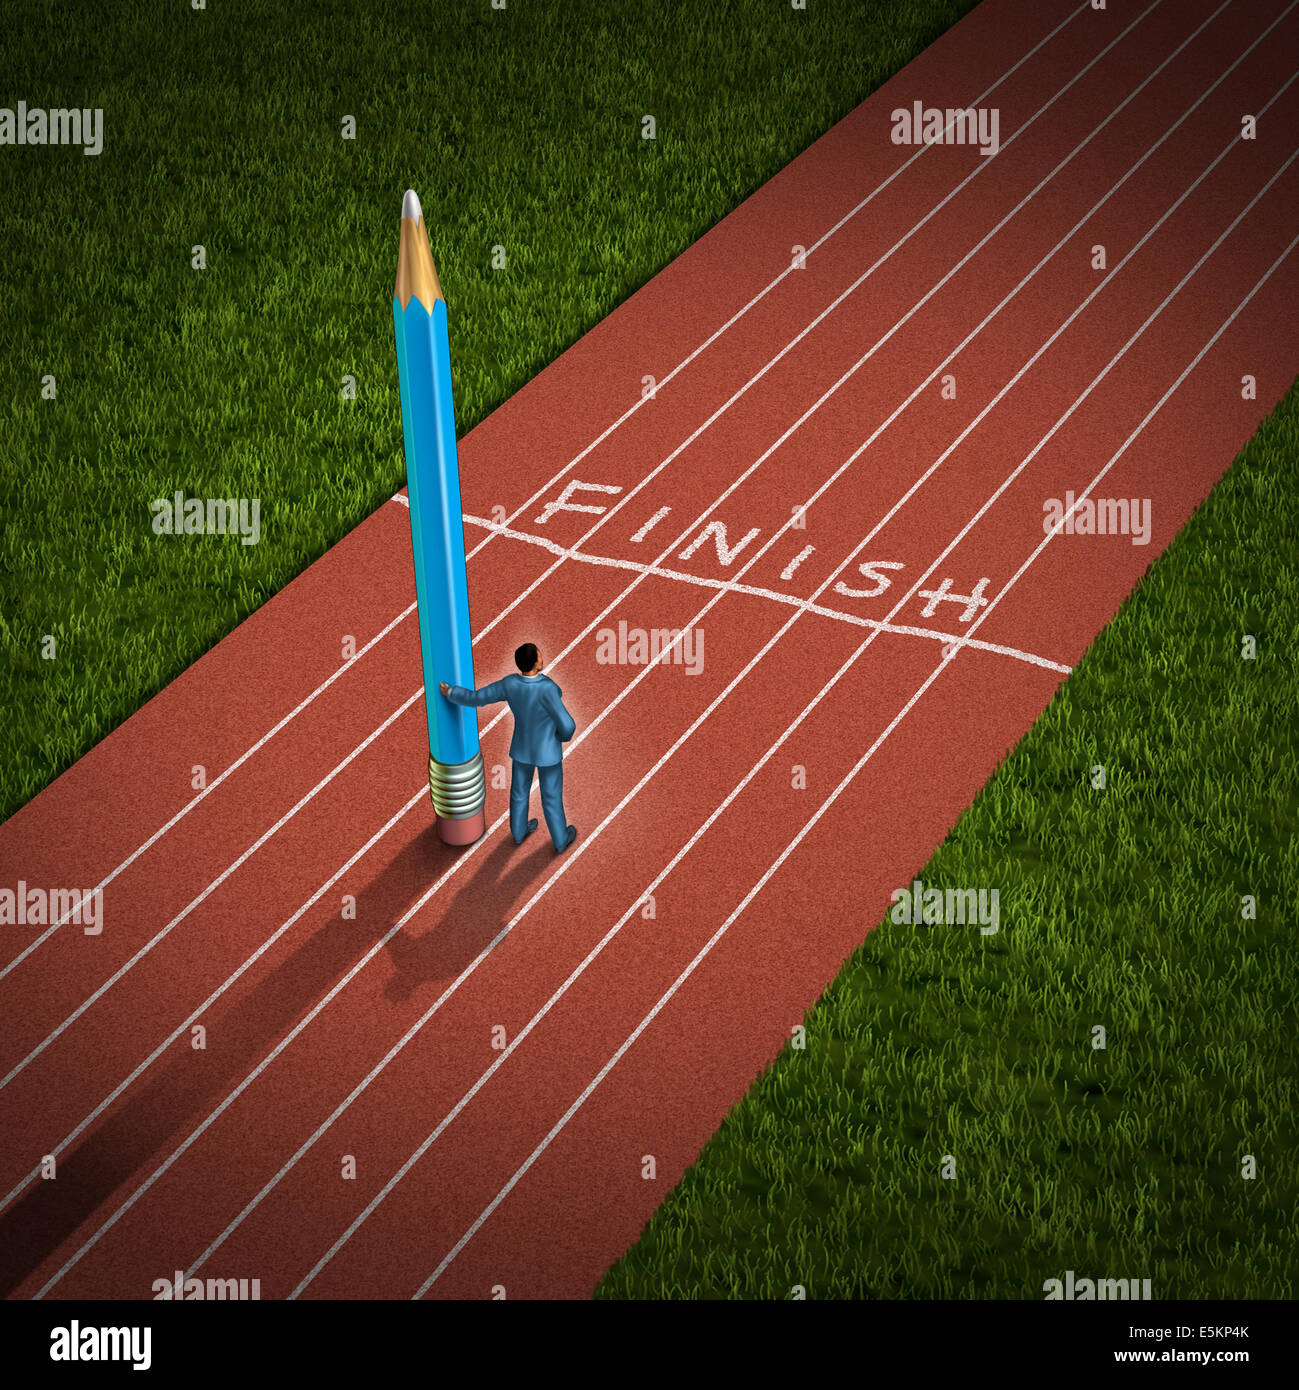 Winning strategy and creative thinking business concept as a successful  businessman holding a giant pencil who has drawn a finish line on a running track as a symbol of innovation and being an outside the box thinker to achieve victory. Stock Photo